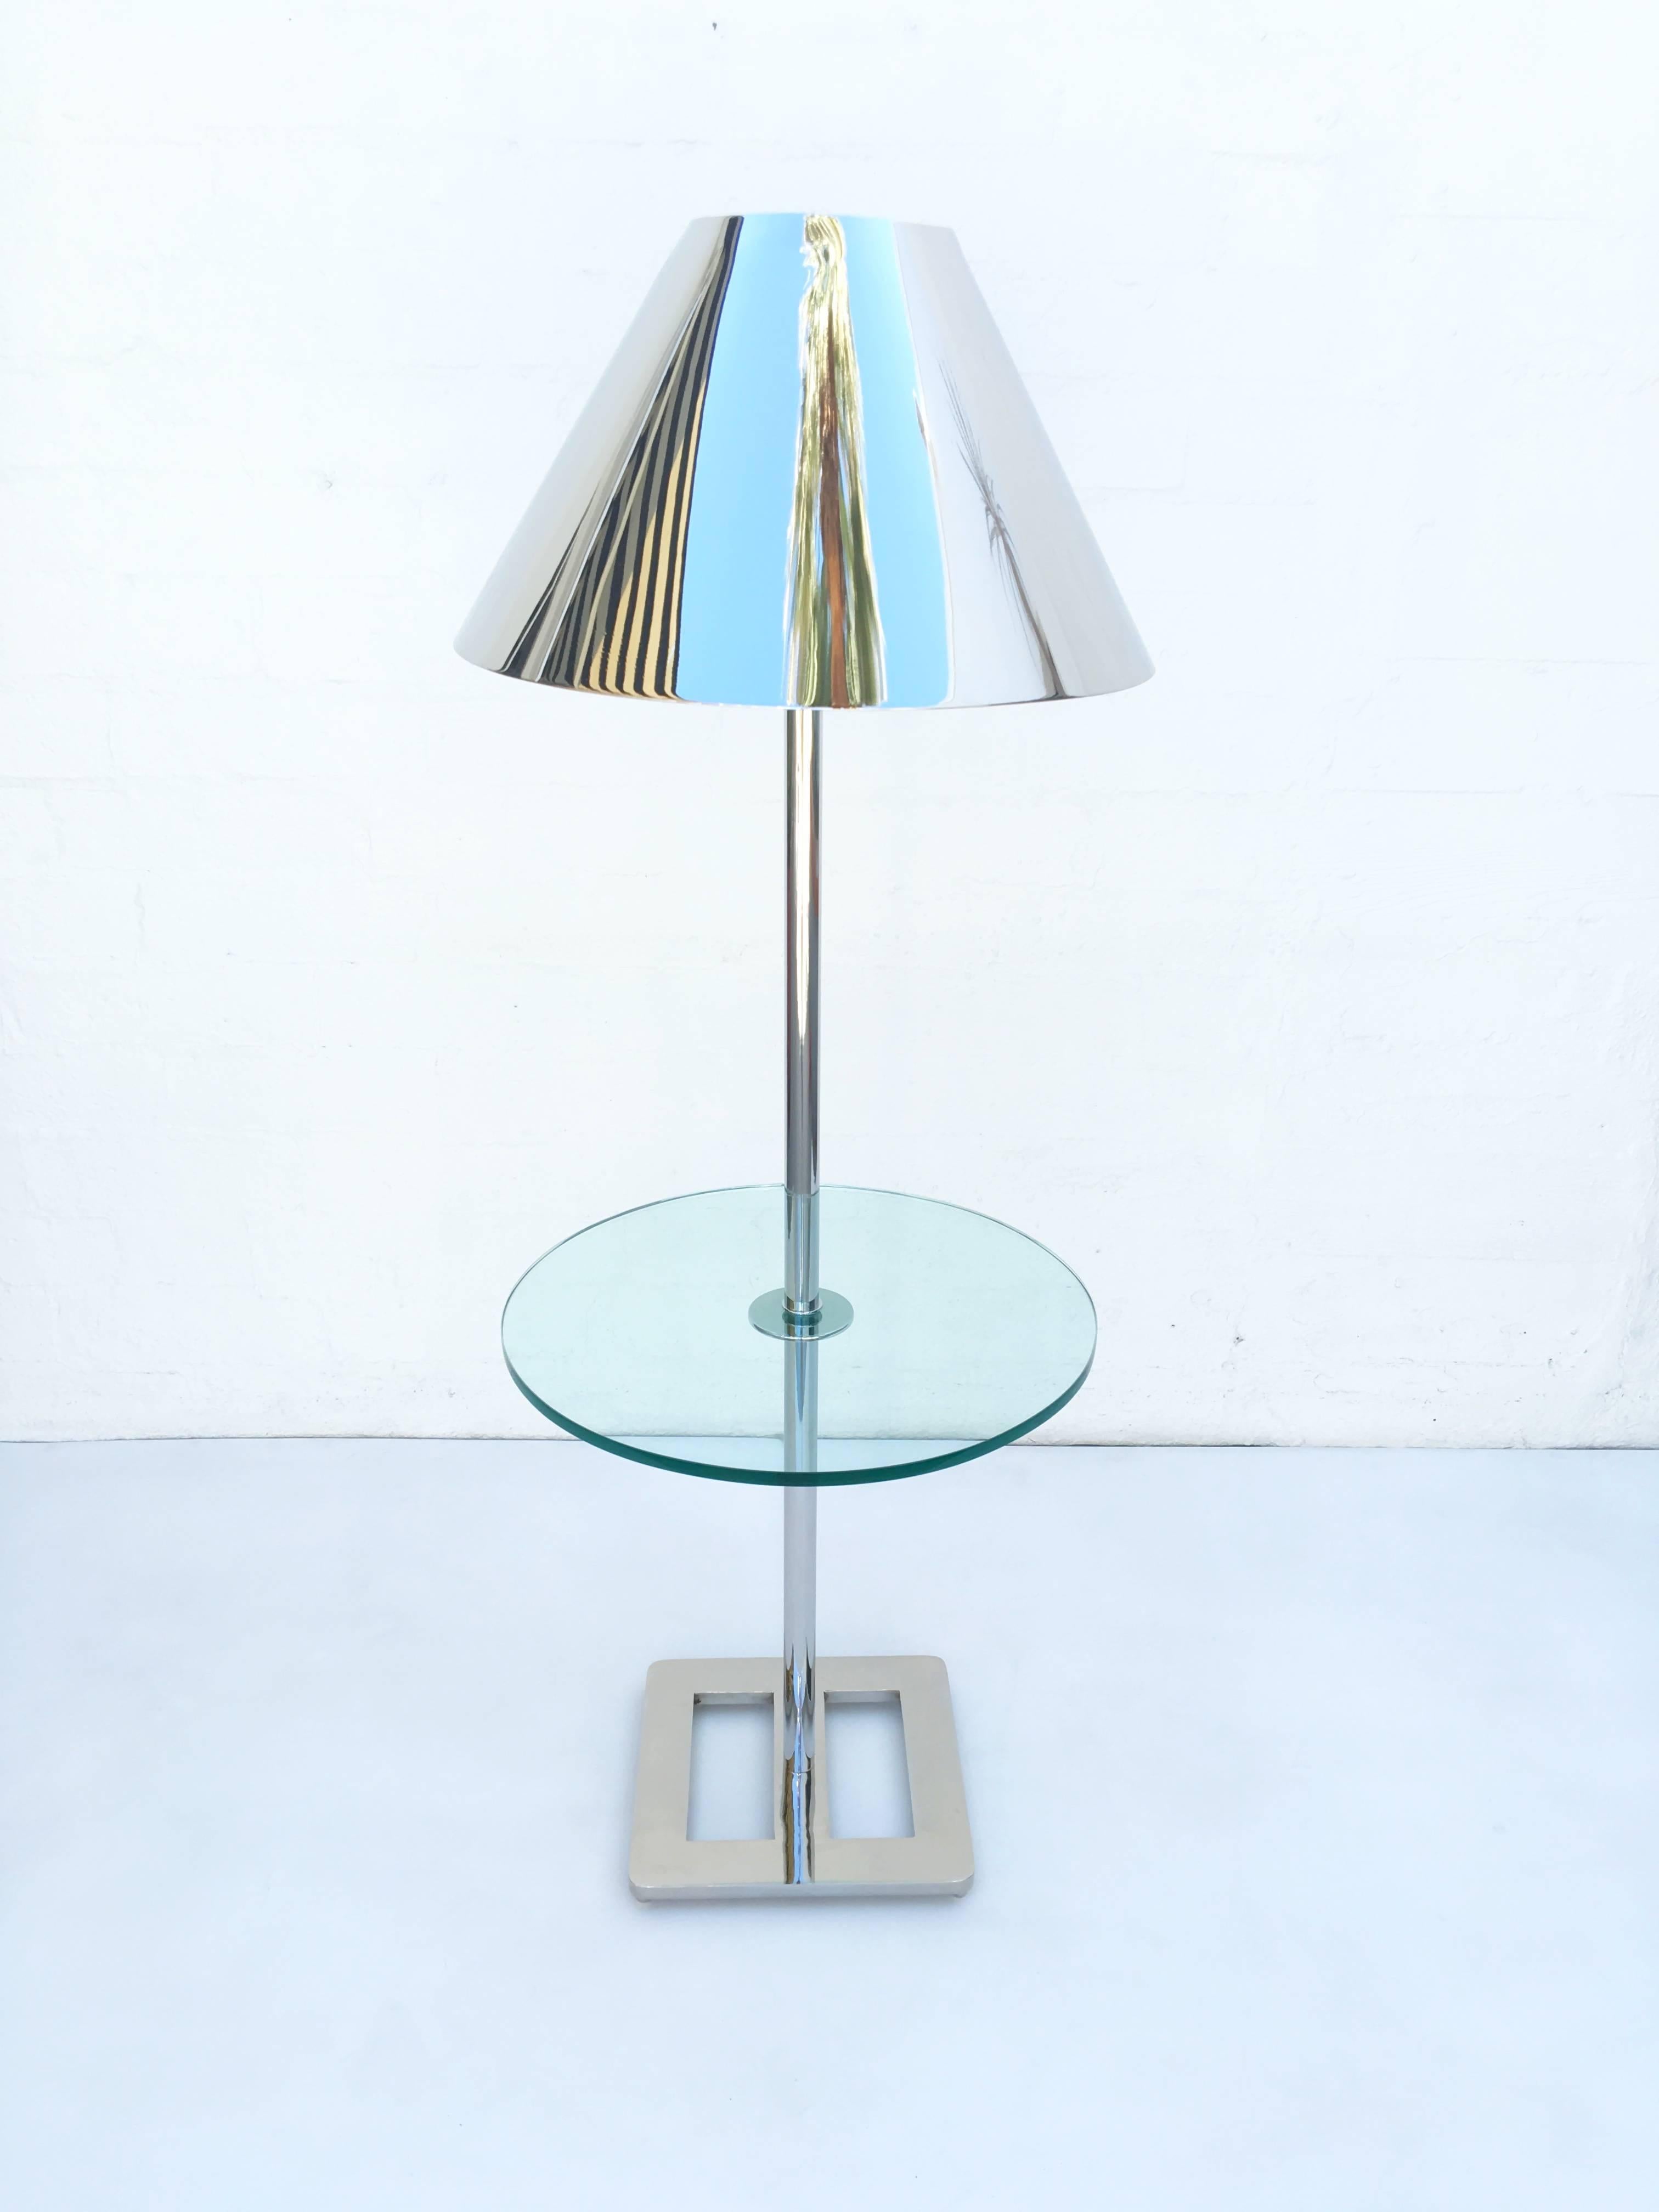 A custom polished nickel floor lamp with built in table combination designed by Charles Hollis Jones in 1970.
Table is 20